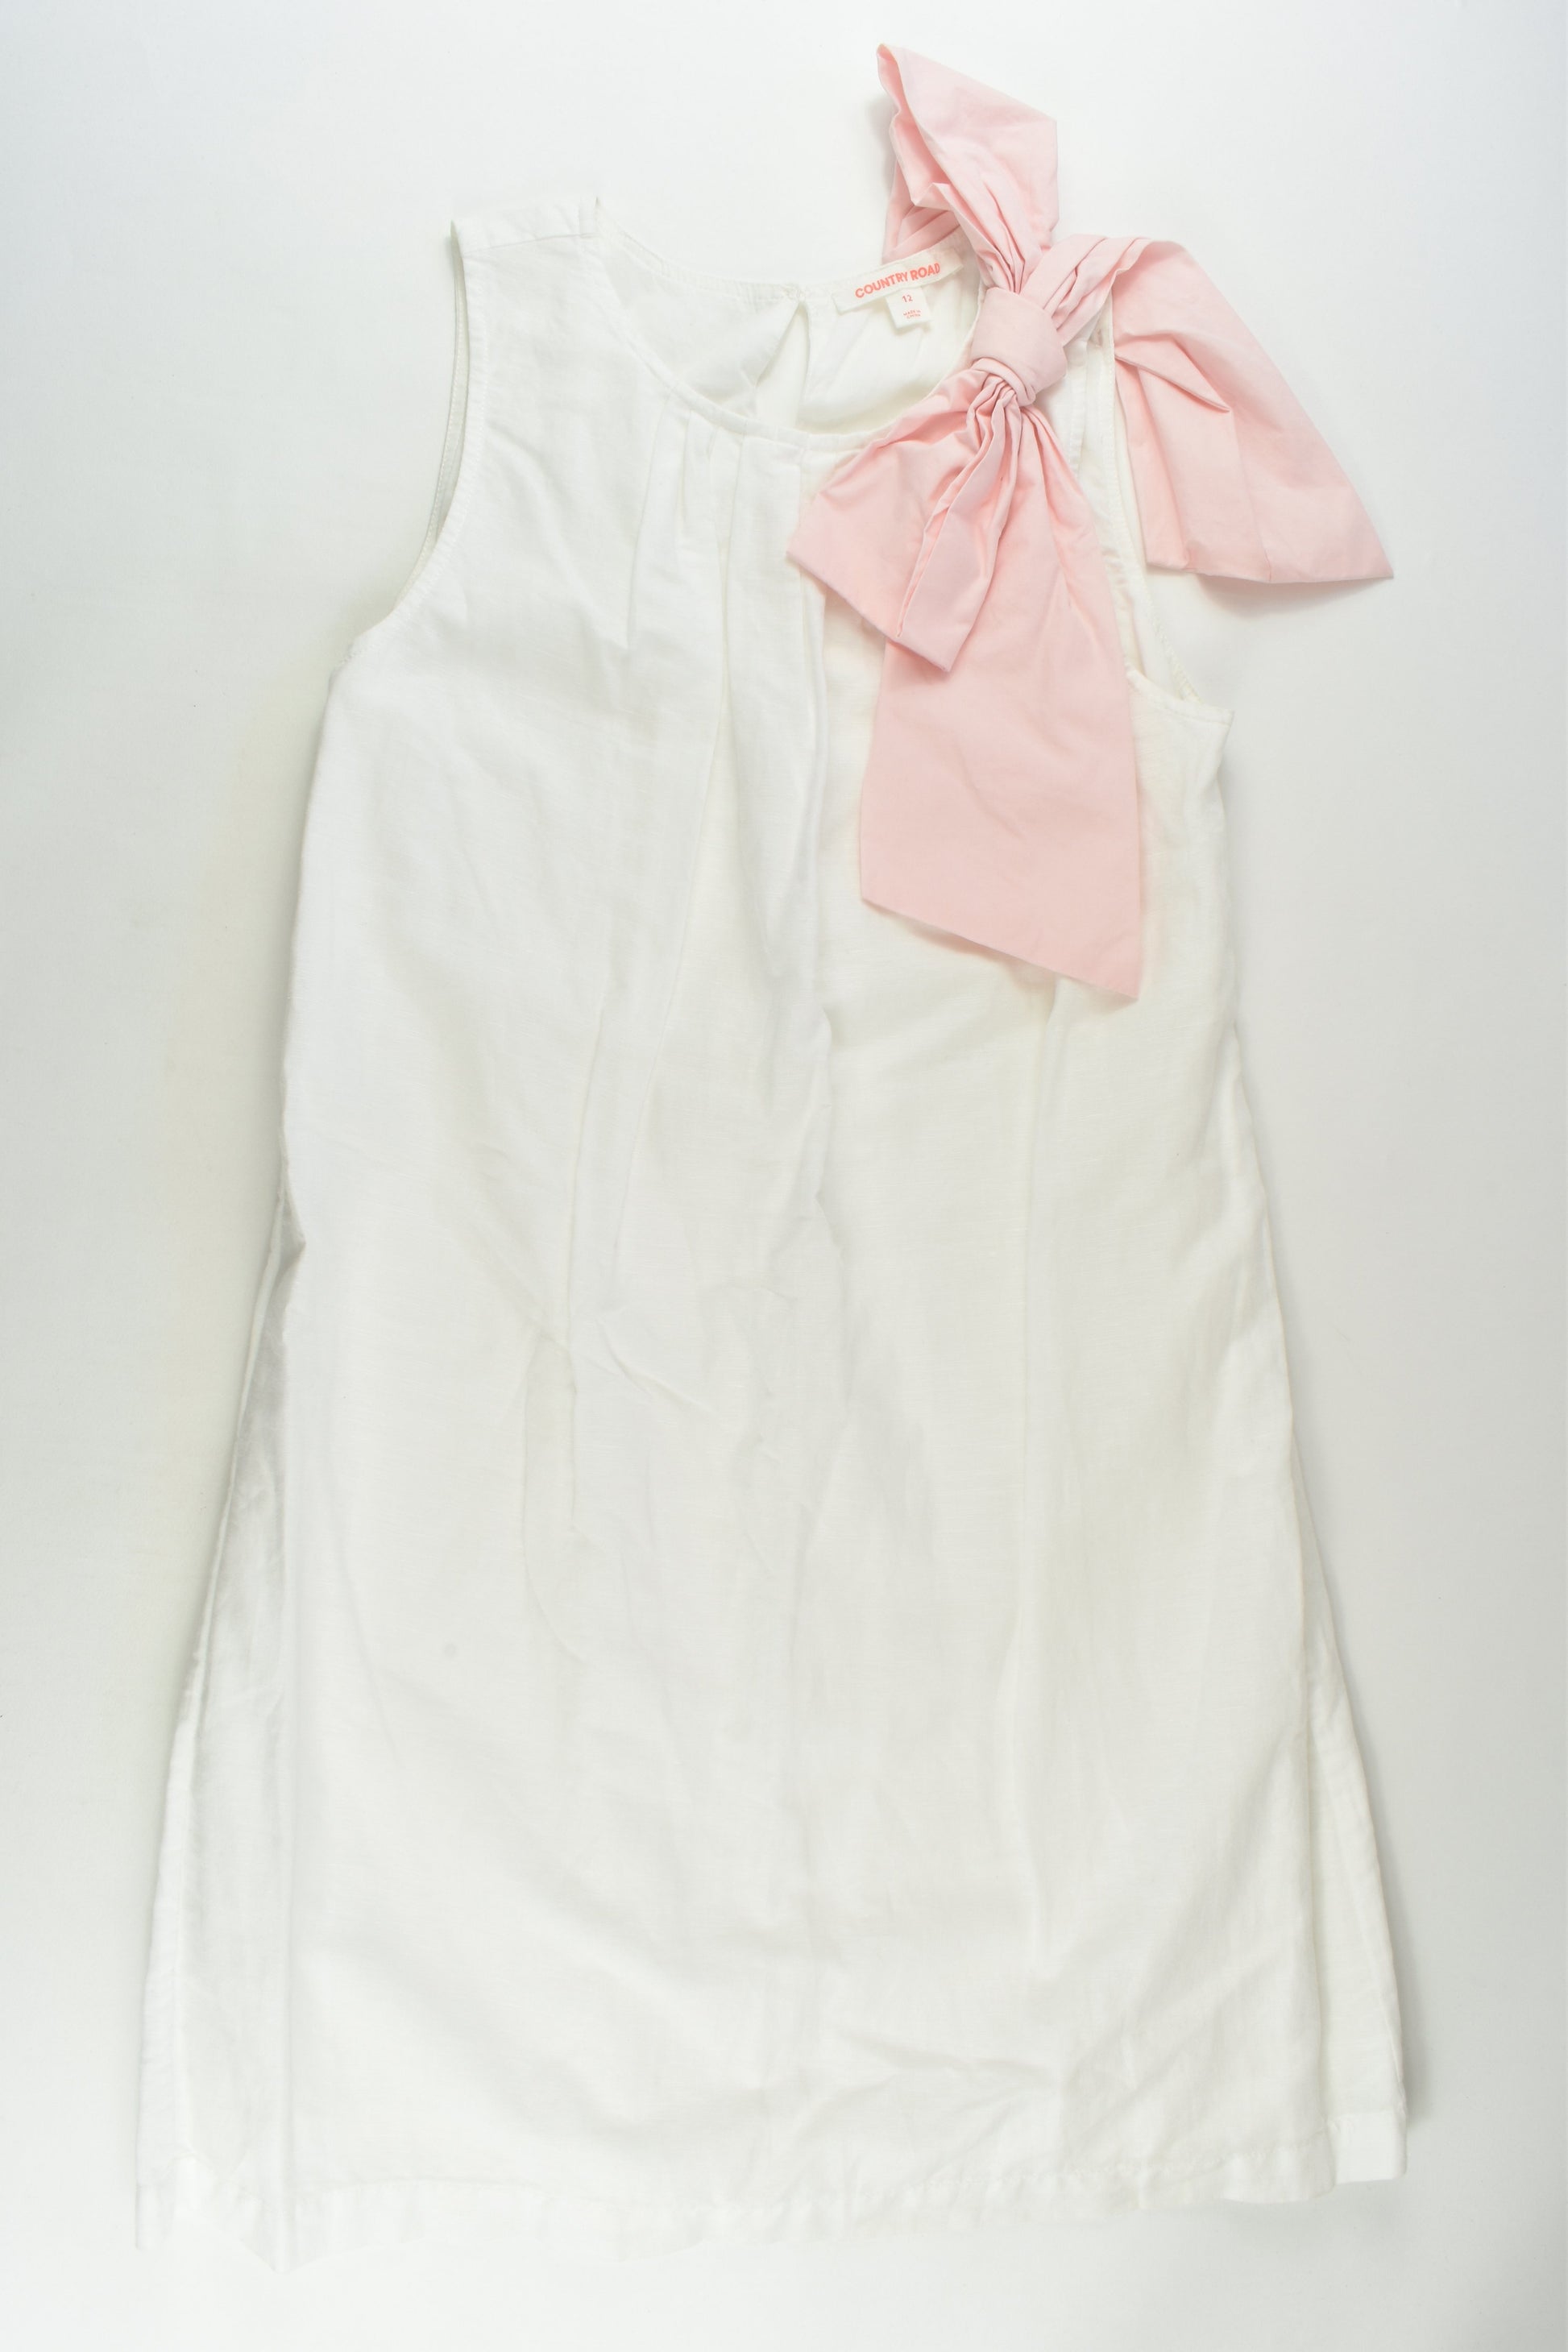 Country Road Size 12 Linen Blend Pink Bow Lined Dress